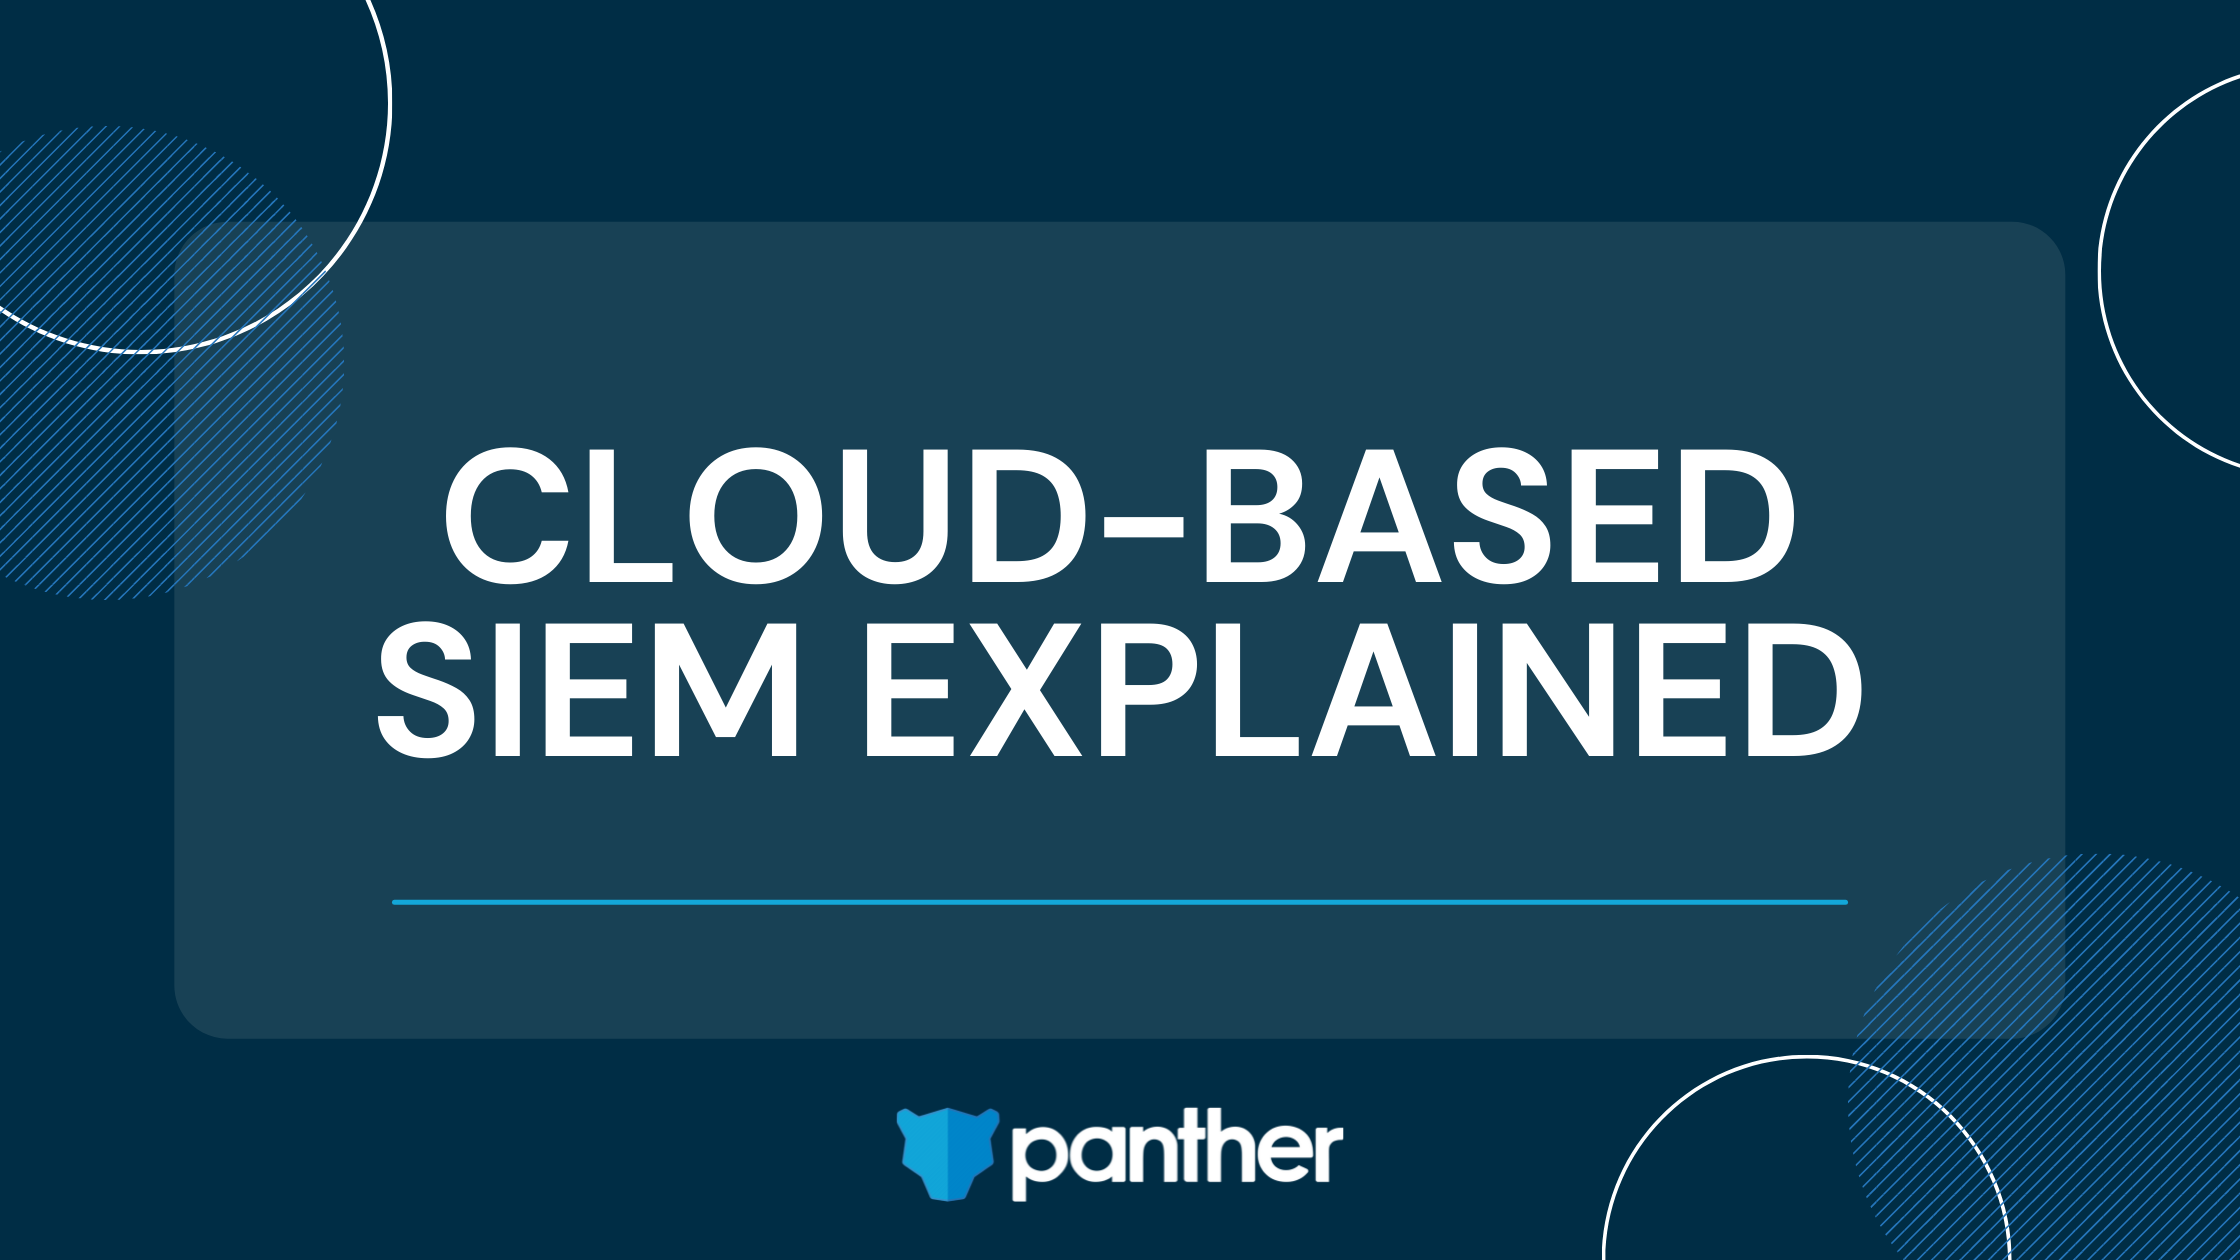 graphic with cloud-based siem explained in large text